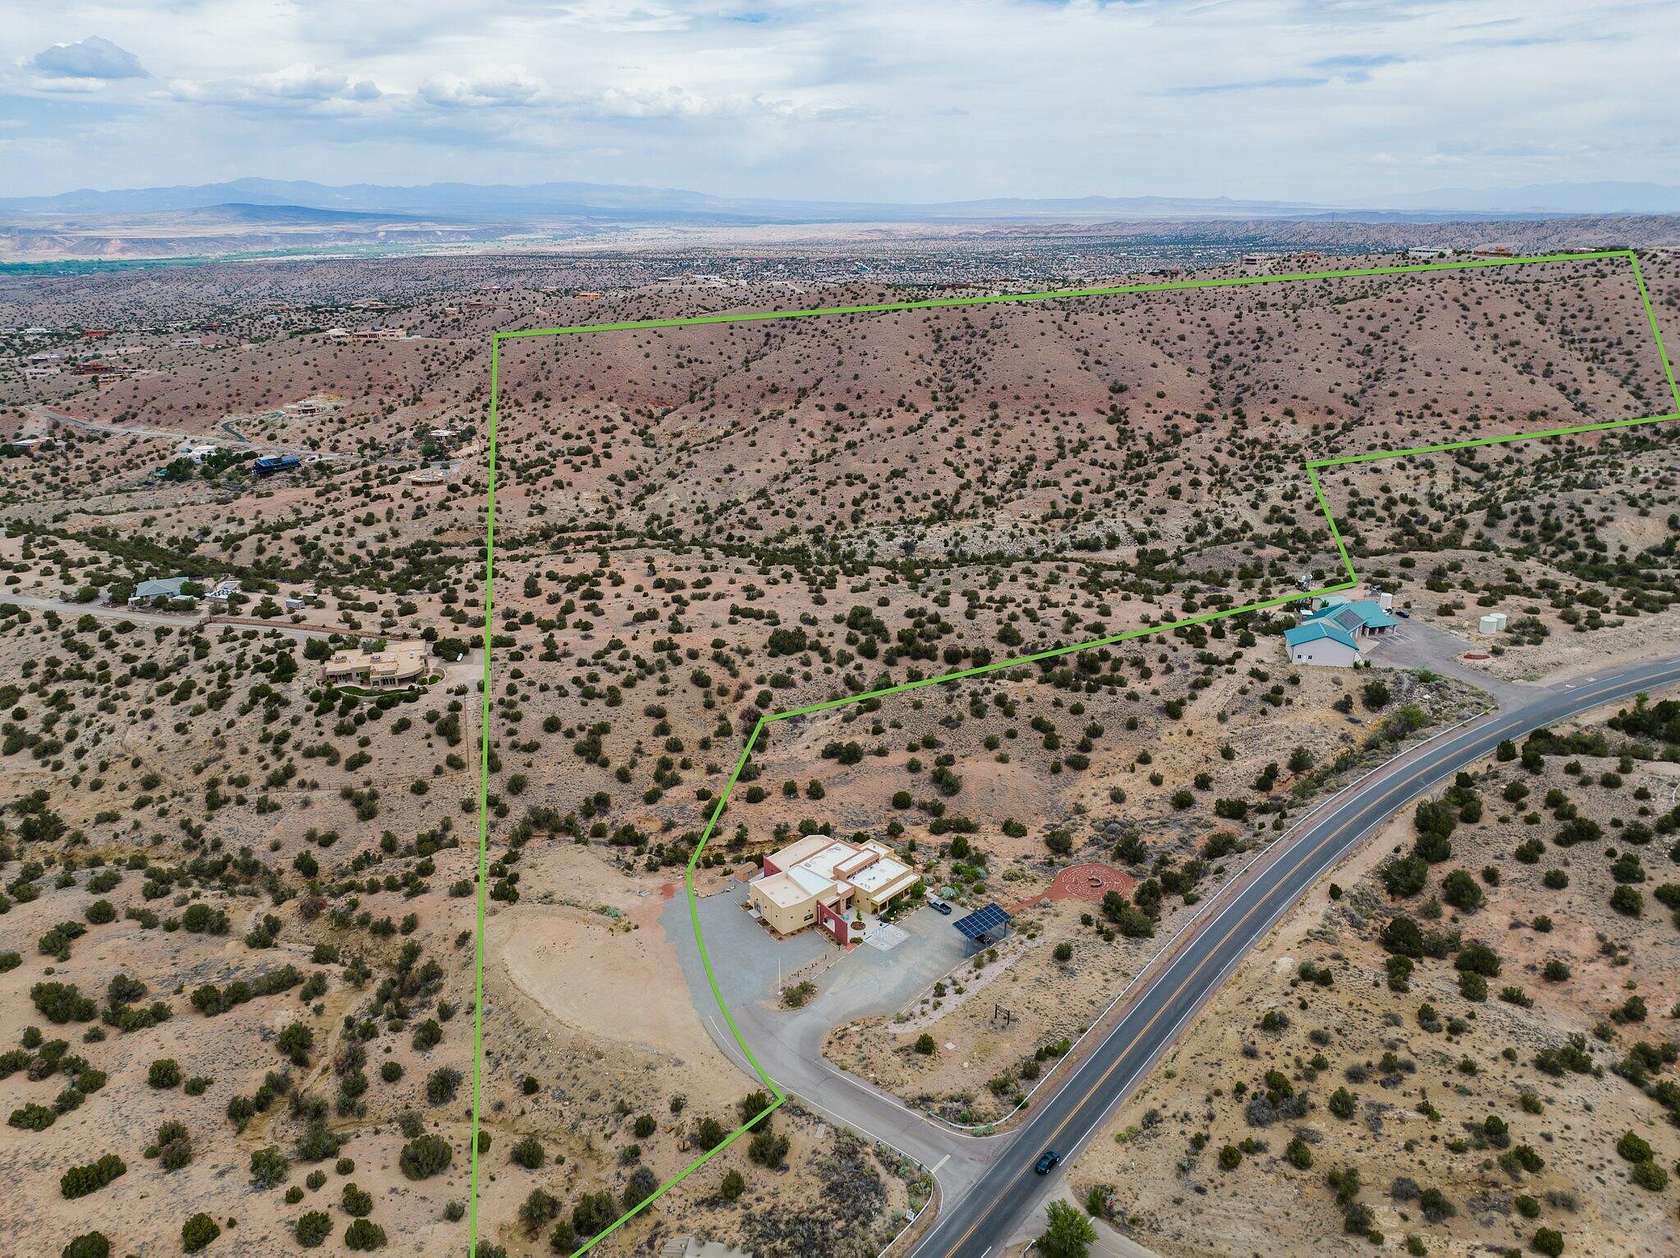 99 Acres of Land for Sale in Placitas, New Mexico